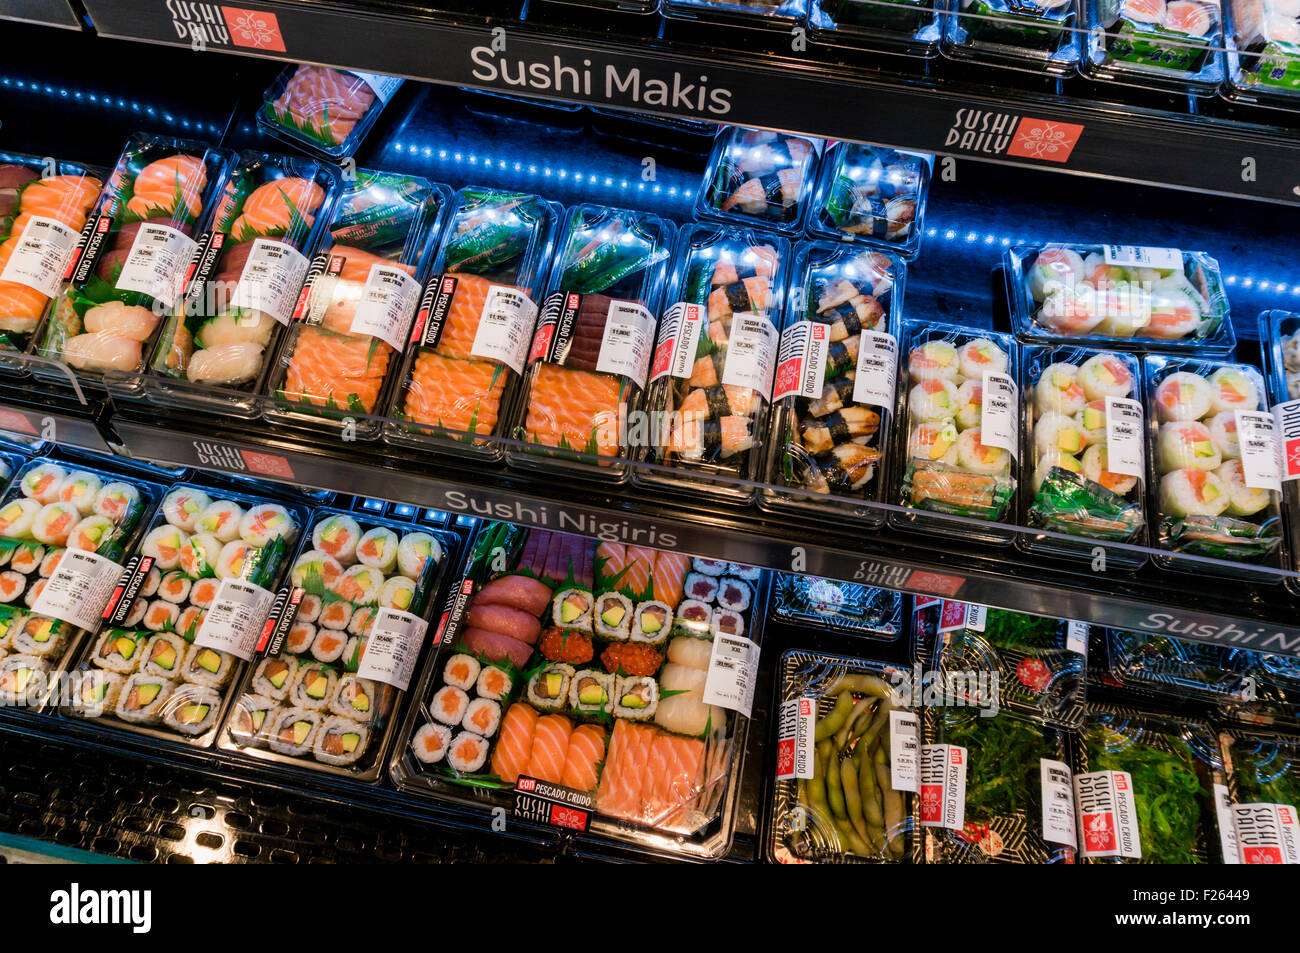 Carrefour supermarket.  Fresh sushi selection. Torremolinos, Costa del Sol, Malaga Province, Andalusia, southern Spain. Stock Photo